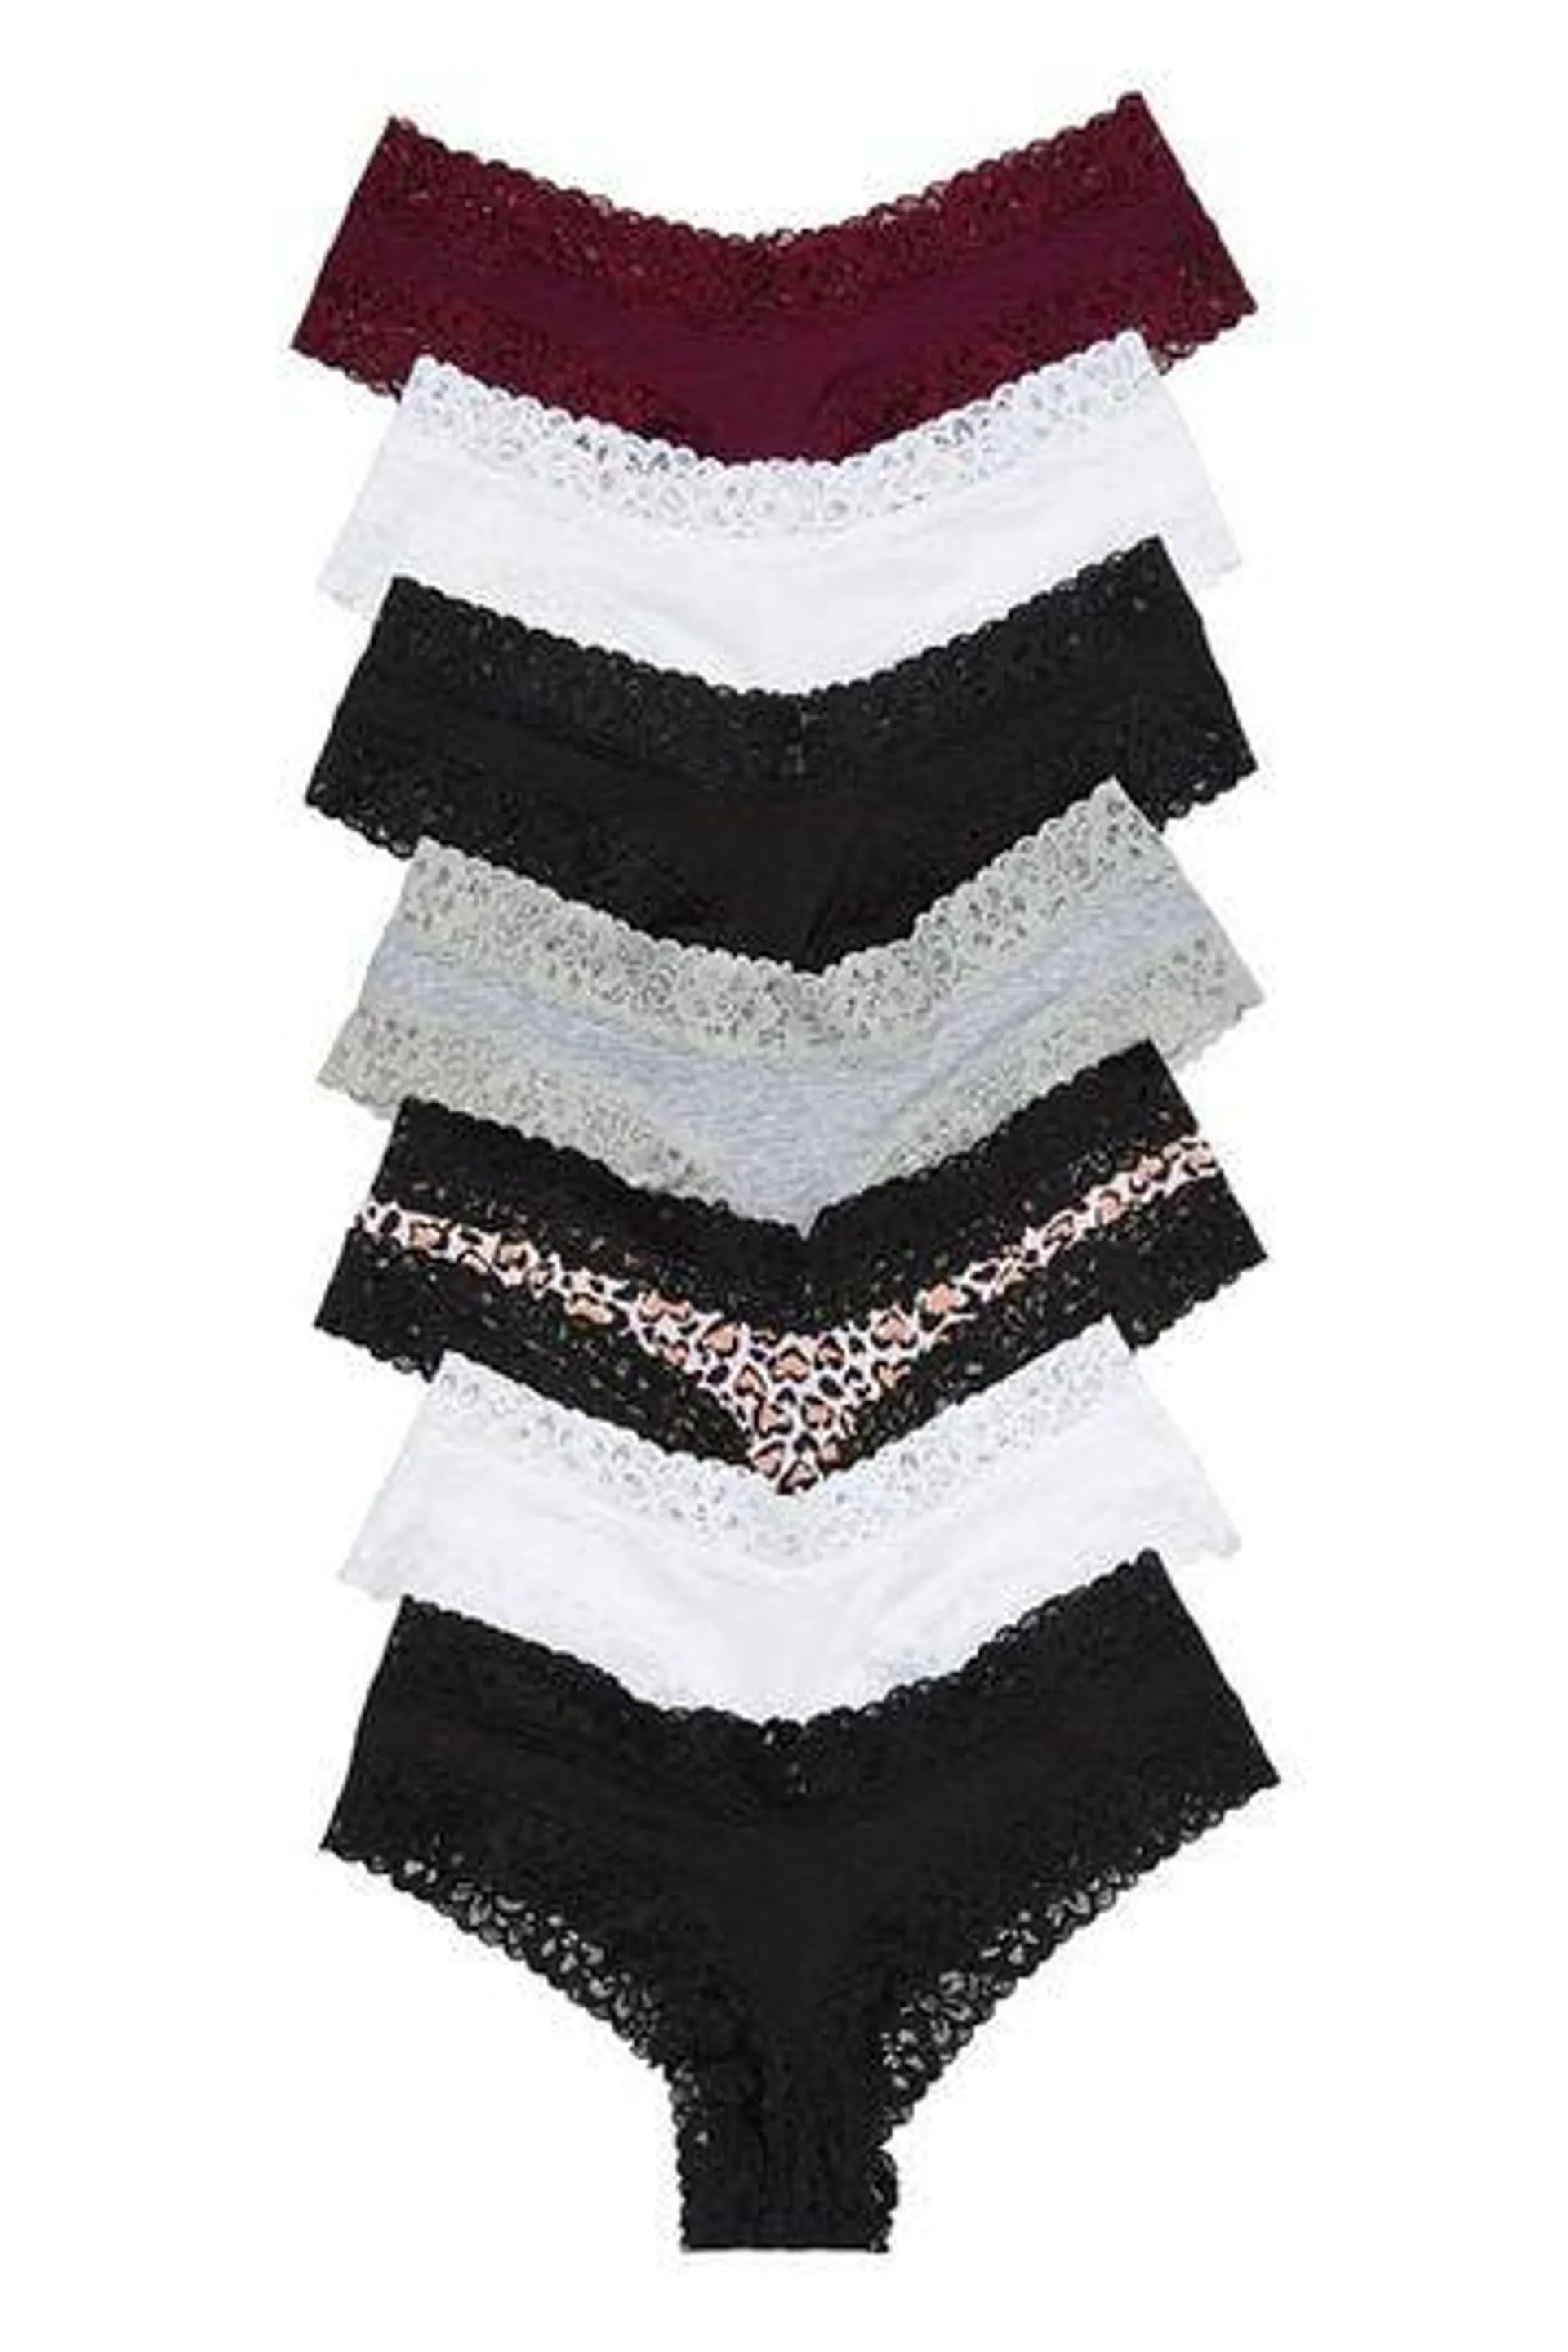 The Lacie Lace Waist Multipack Cheeky Knickers